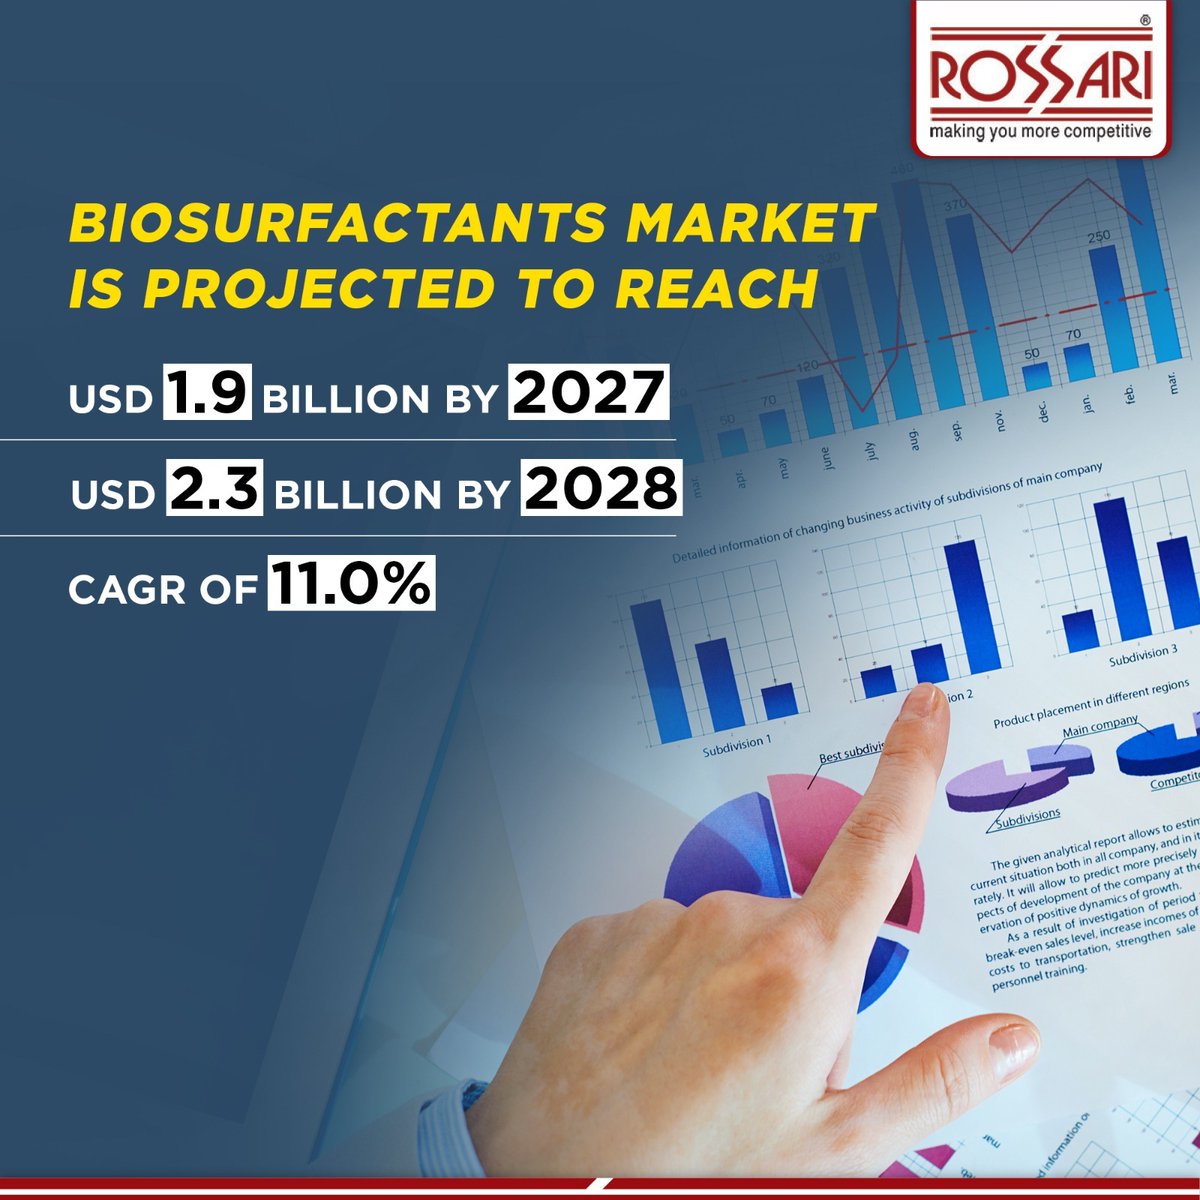 Customer awareness and cost-effective production techniques - Biosurfactants Market is set to reach its best potential in the coming years.

#rossari #rossaribiotech #rossarichemical #chemicals    #perfromancechemical #Biosurfactants #Biosurfactantsmarket #marketgrowth